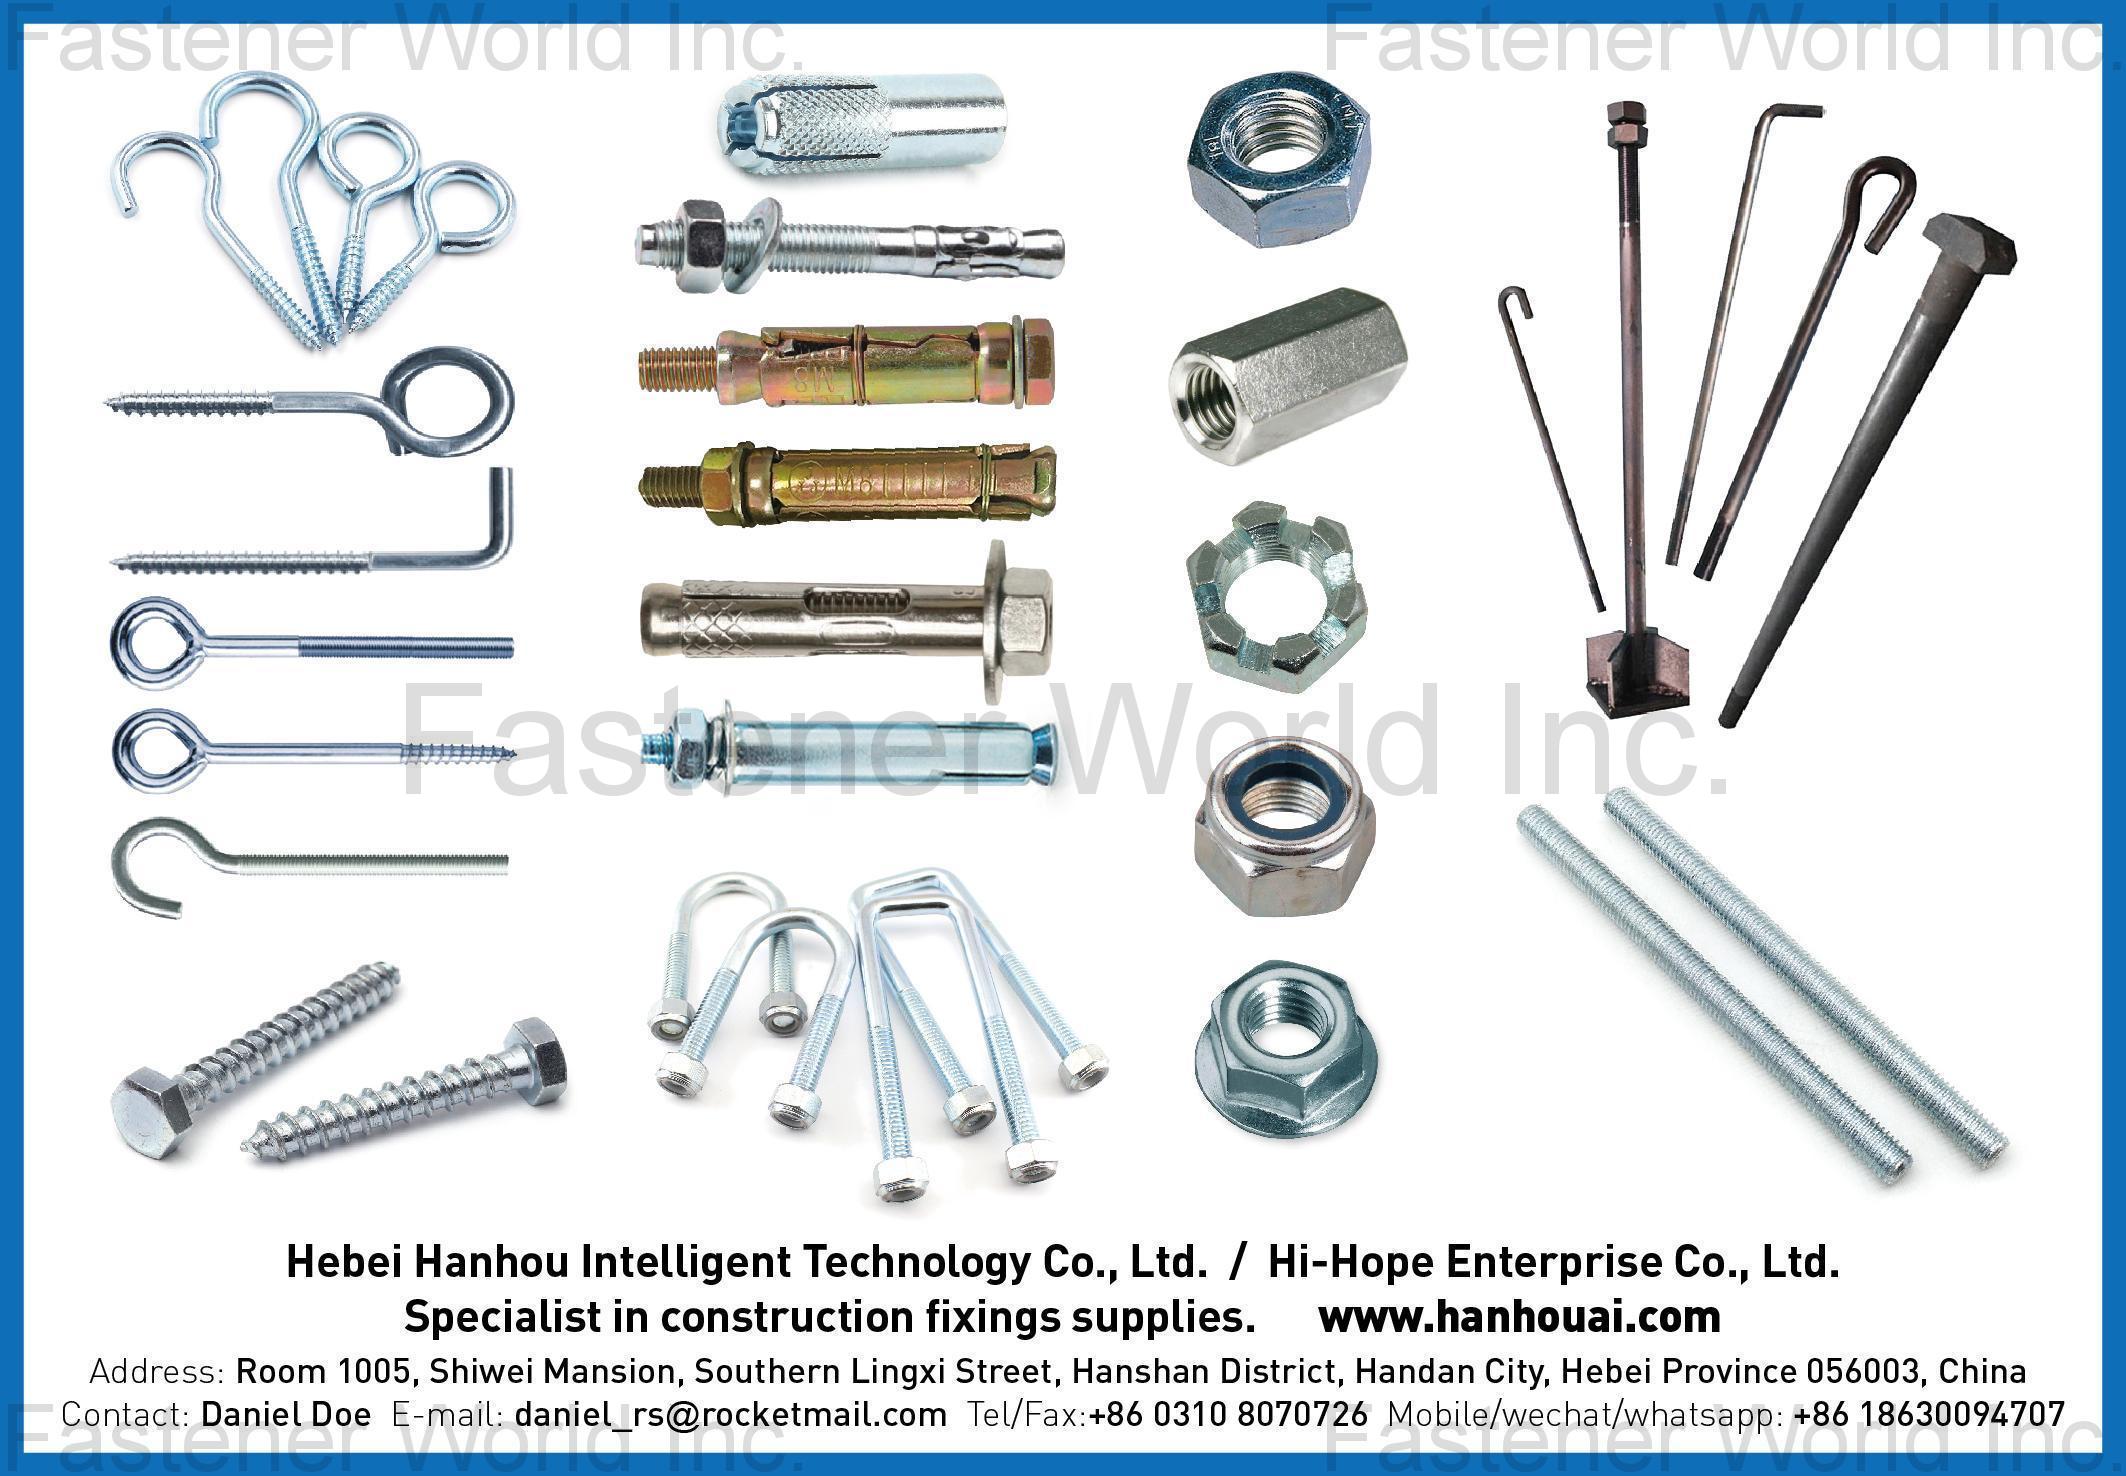 Handan Chinlion Industry Co., Ltd. , Hook Screws / Eye Screws / Hex Lag Screws / Sleeve Anchors / Wedge Anchors / U Bolts / Foundation Bolts / Threaded Rods / Nut / Riggings / Strut Channel and Accessories / Grooved Pipe Fittings